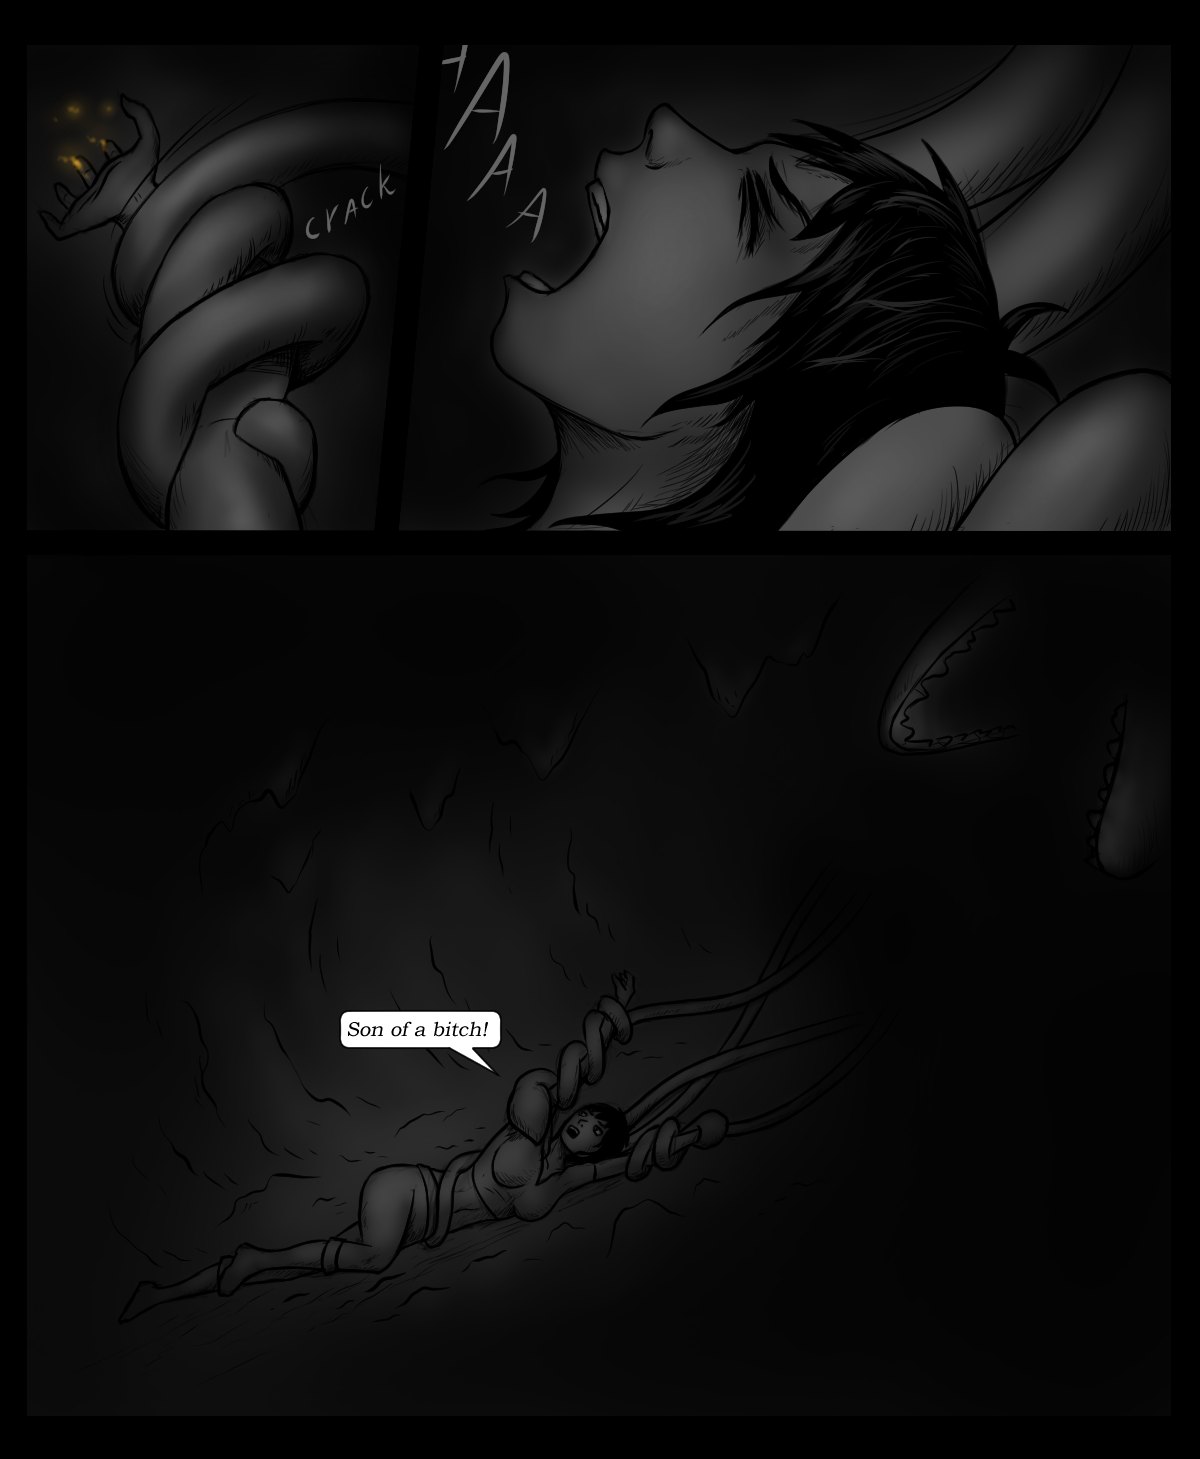 Page 57 - An arm for an arm